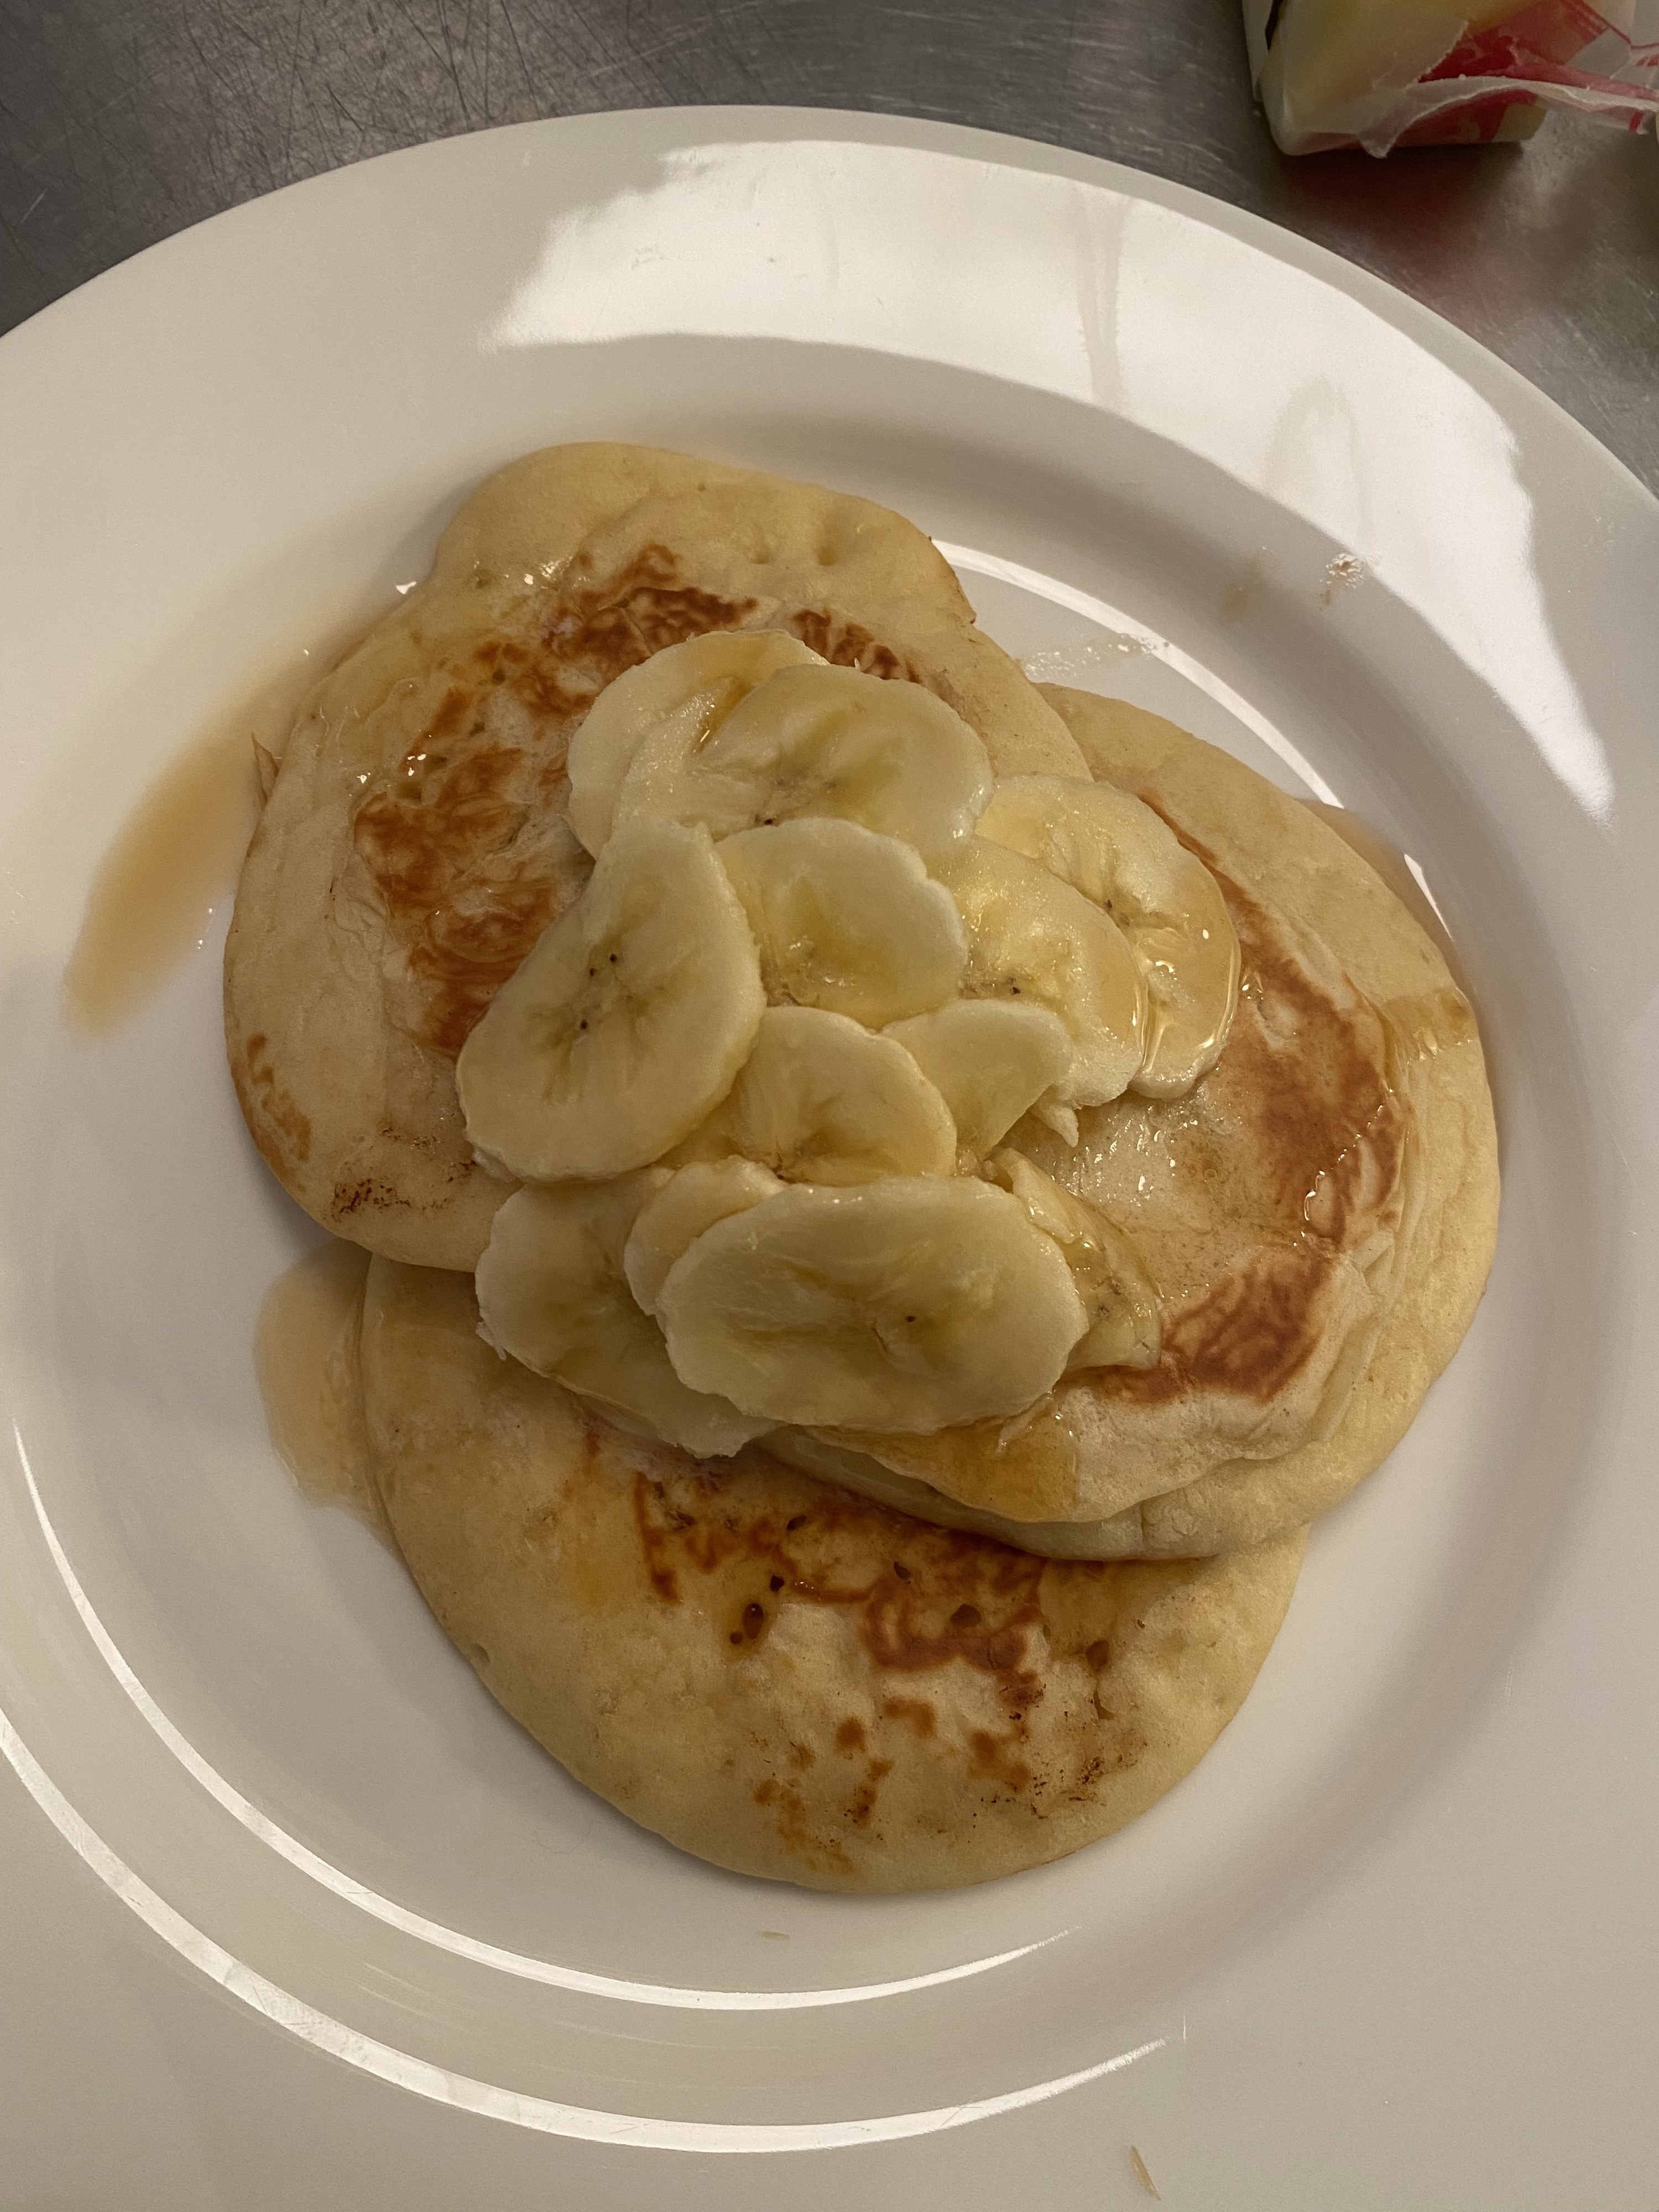 the pancakes with banana slices on a white plate